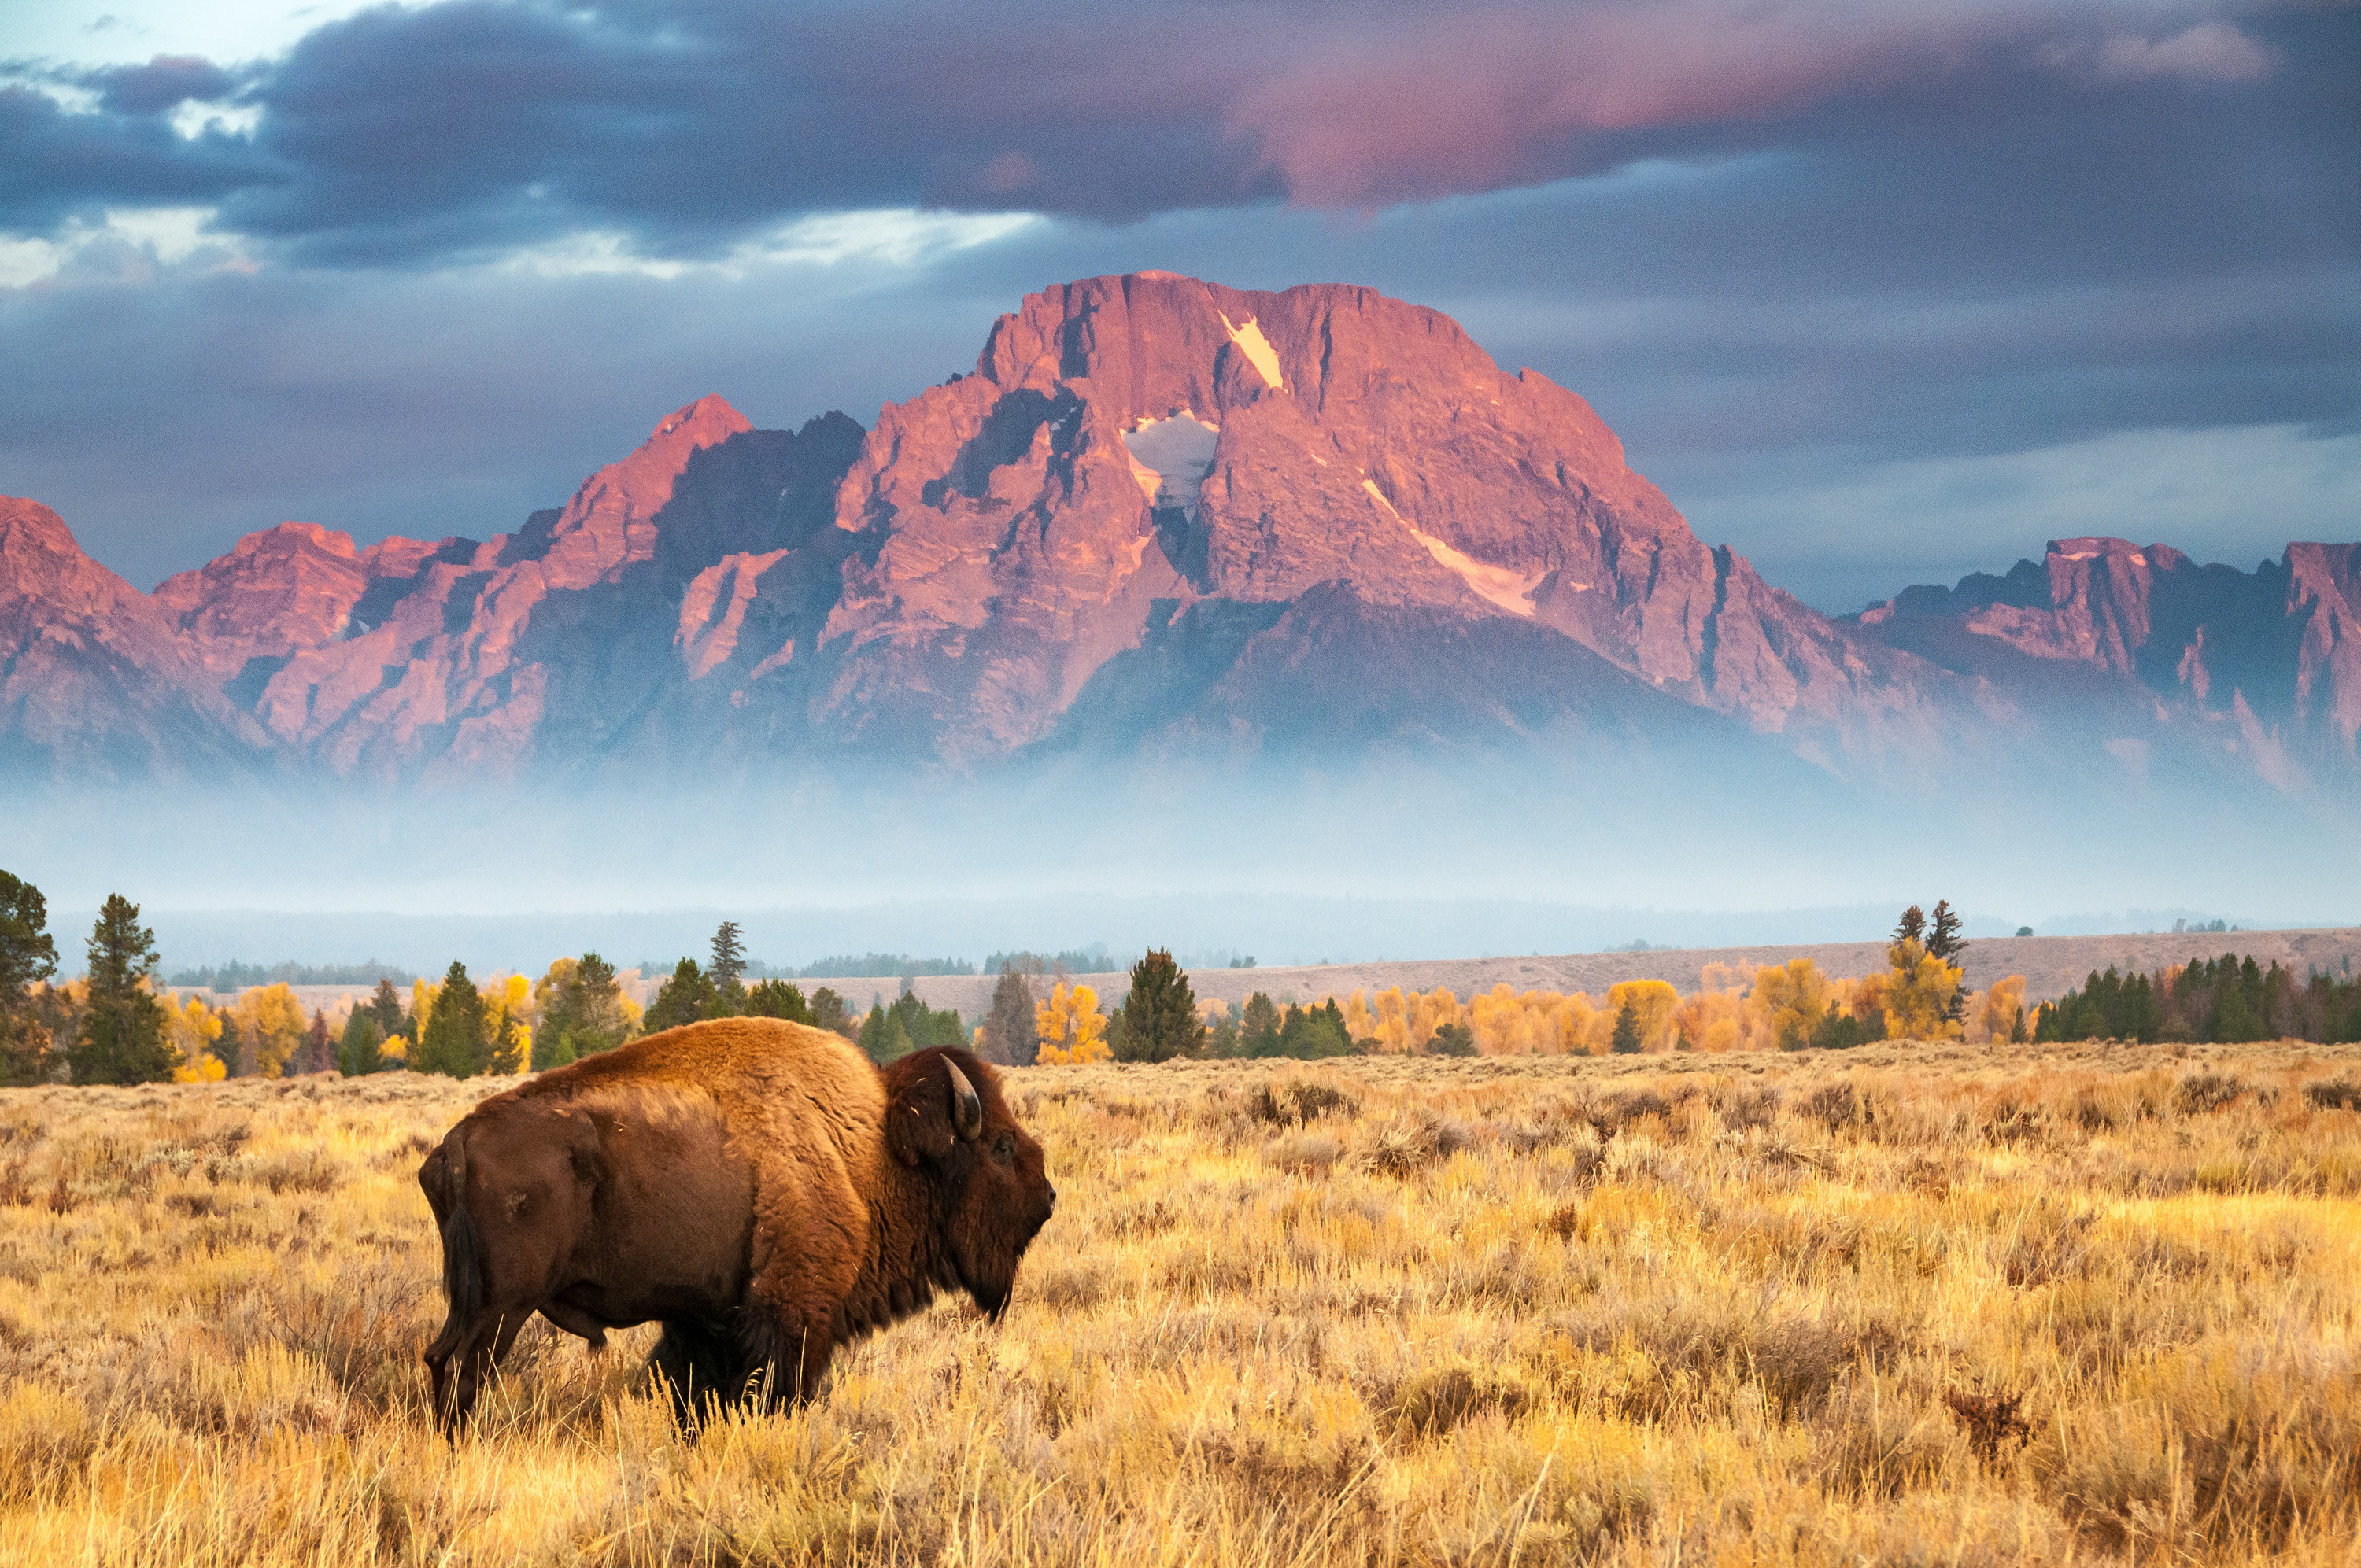 Bison in a field at the base of a giant mountain